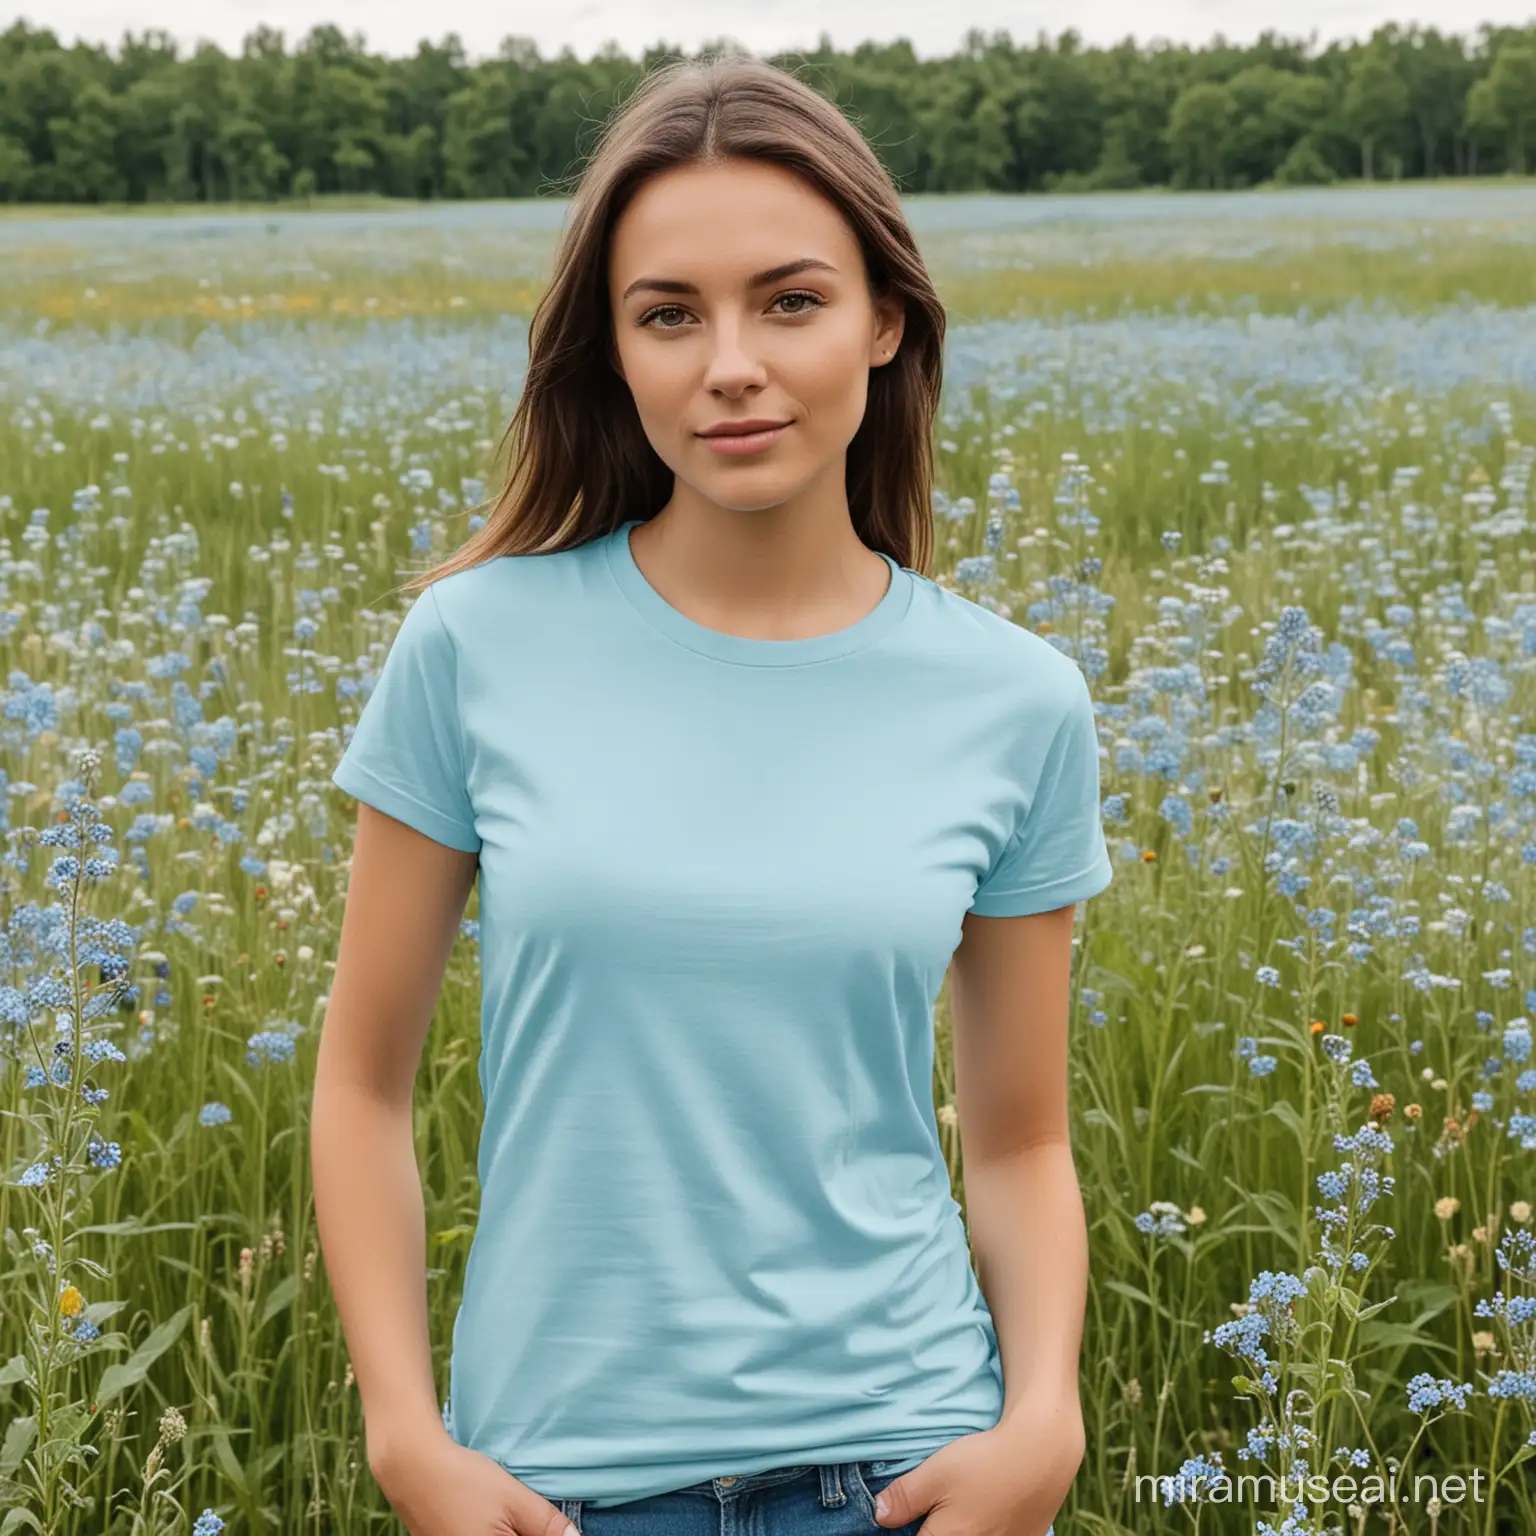 Bella+Canvas 3001 t-shirt mockup,  light blue color, blank t-shirt, young woman standing in a field wildflowers